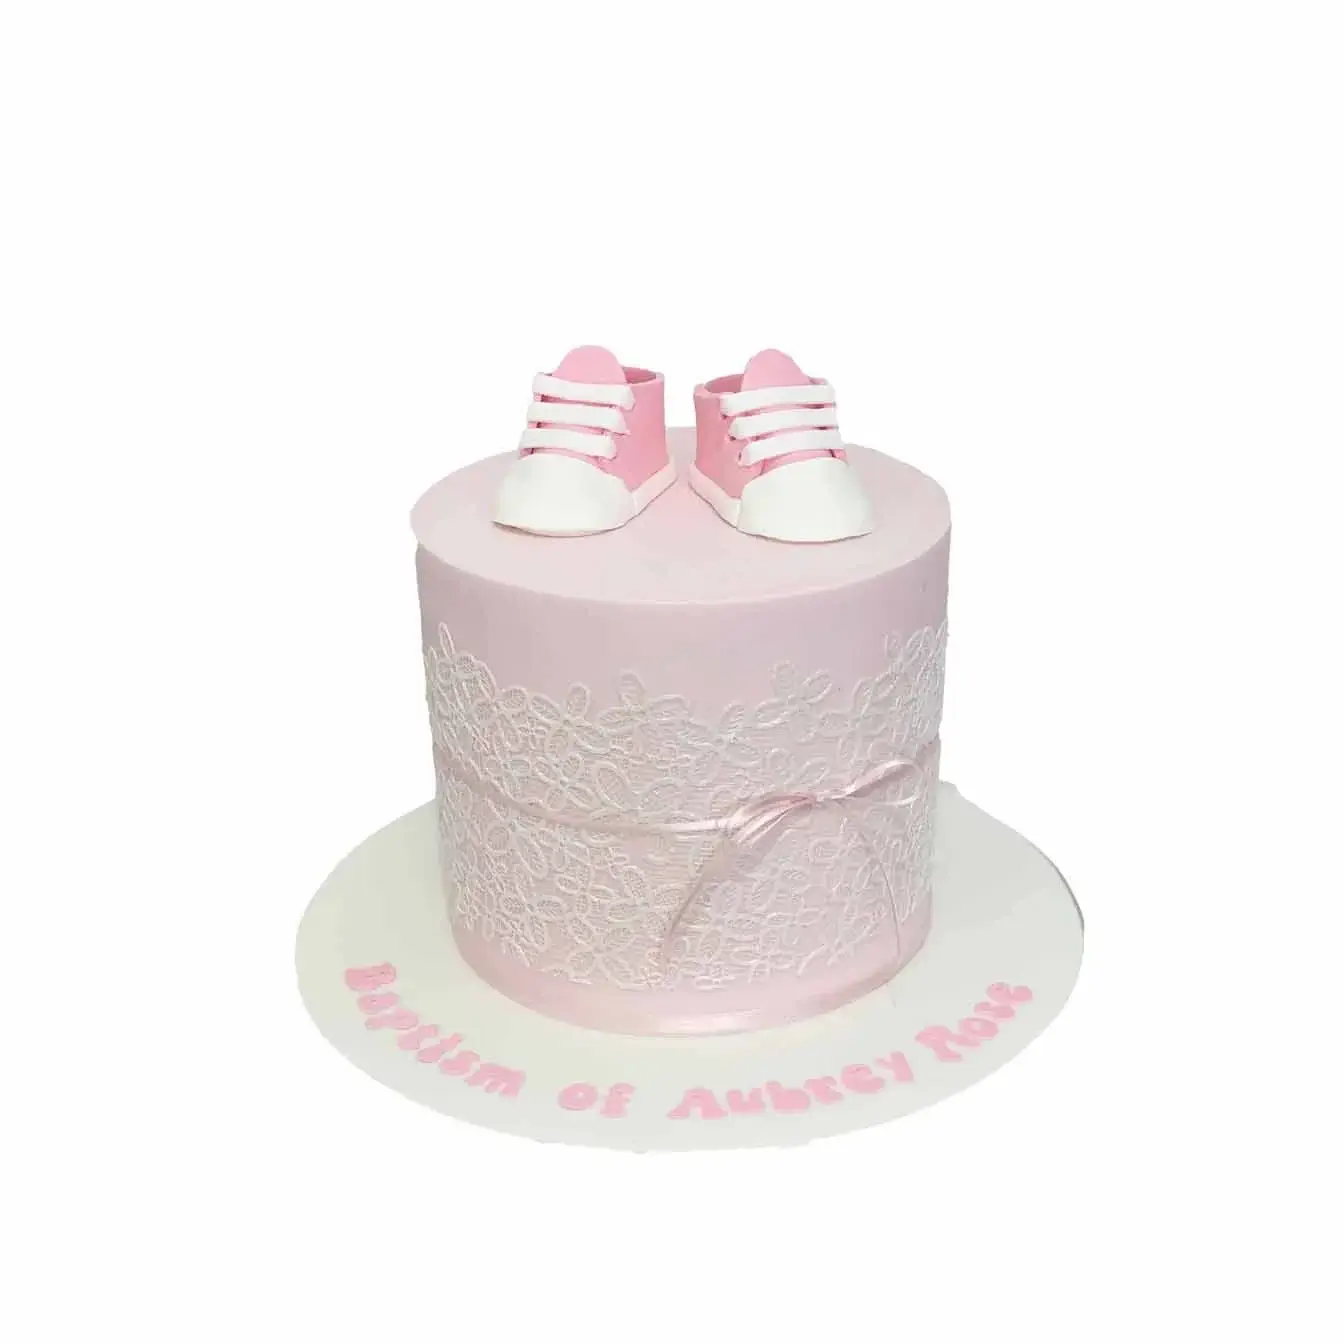 Pink Blessings Baptism Cake - A pink cake with white edible lace and adorable pink baby booties on top, a beautiful centerpiece for a baptism filled with love and blessings.